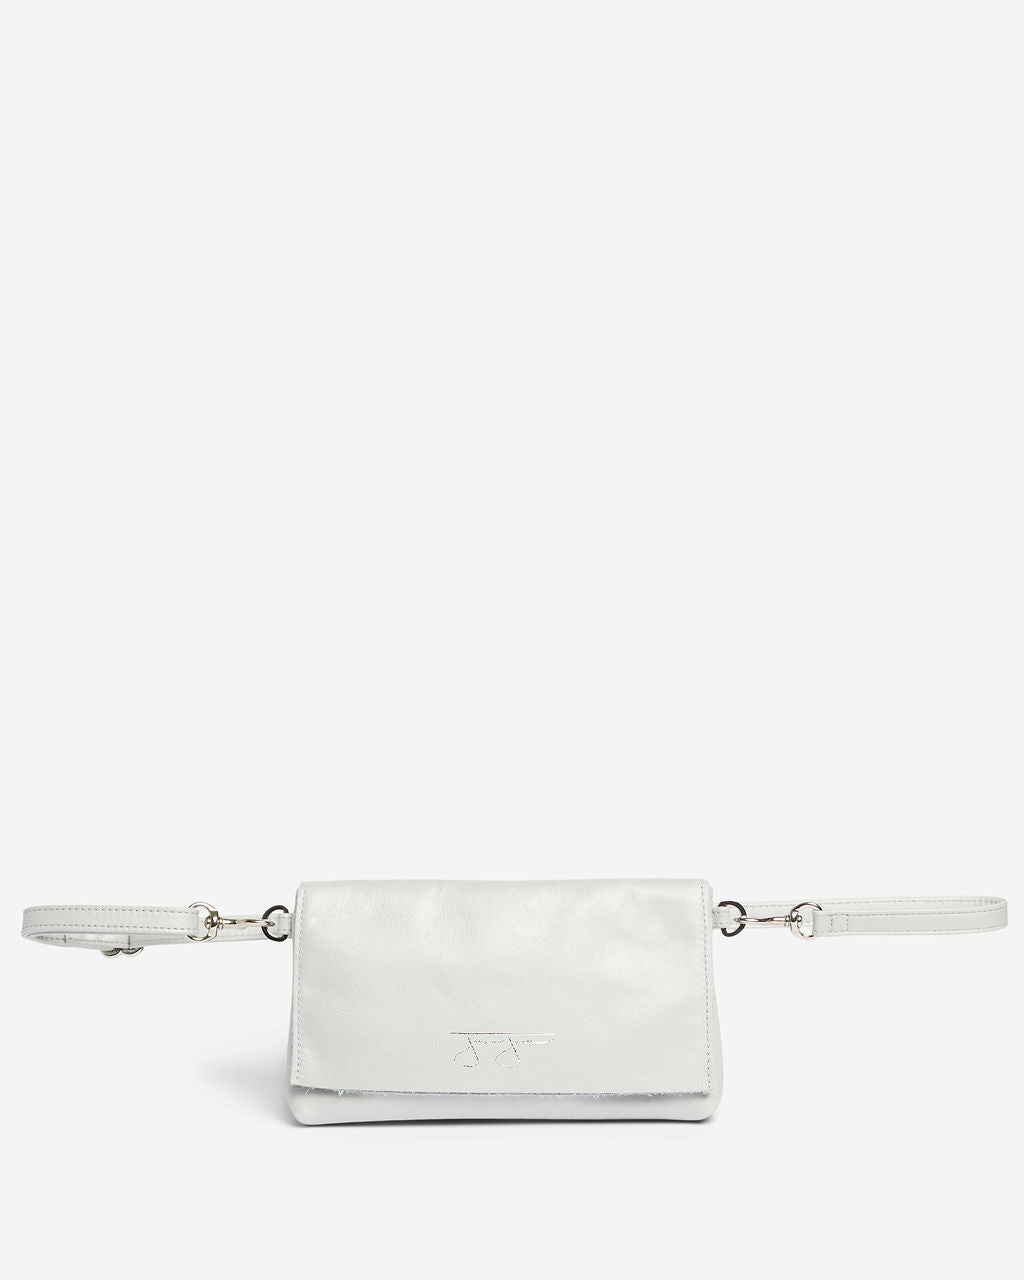 Norma Hipster Bag - Silver  Joey James, The Label   